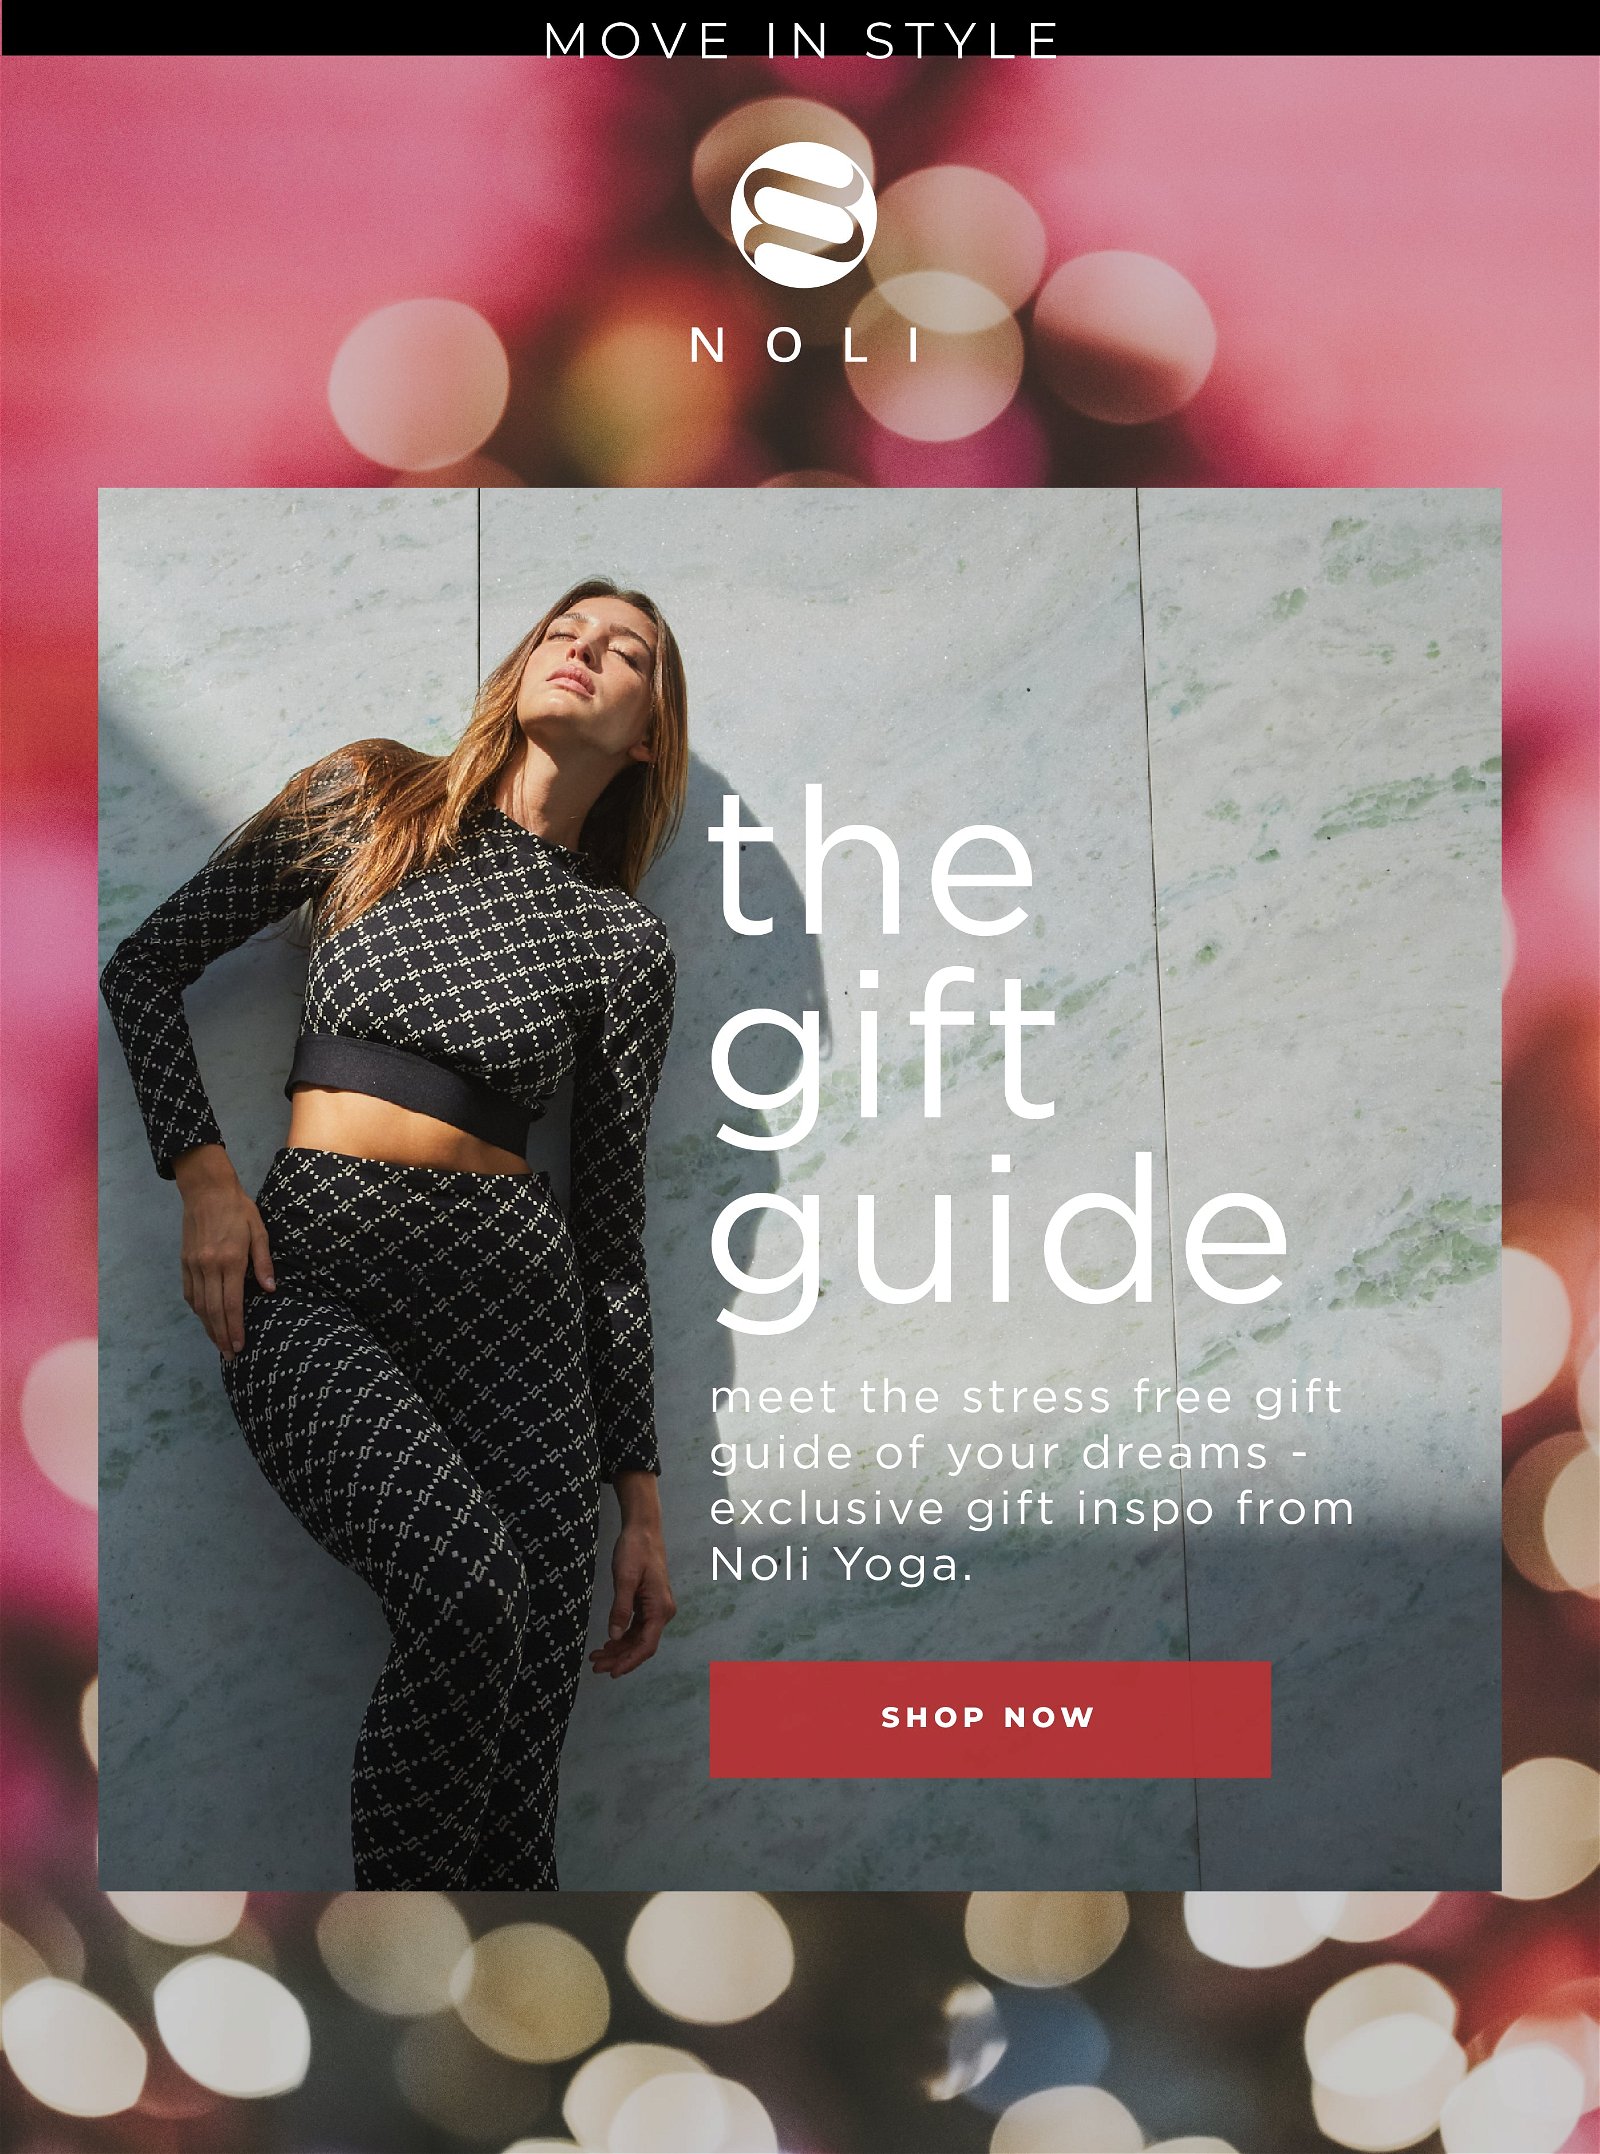 Noli Yoga: The best gifts to give and get